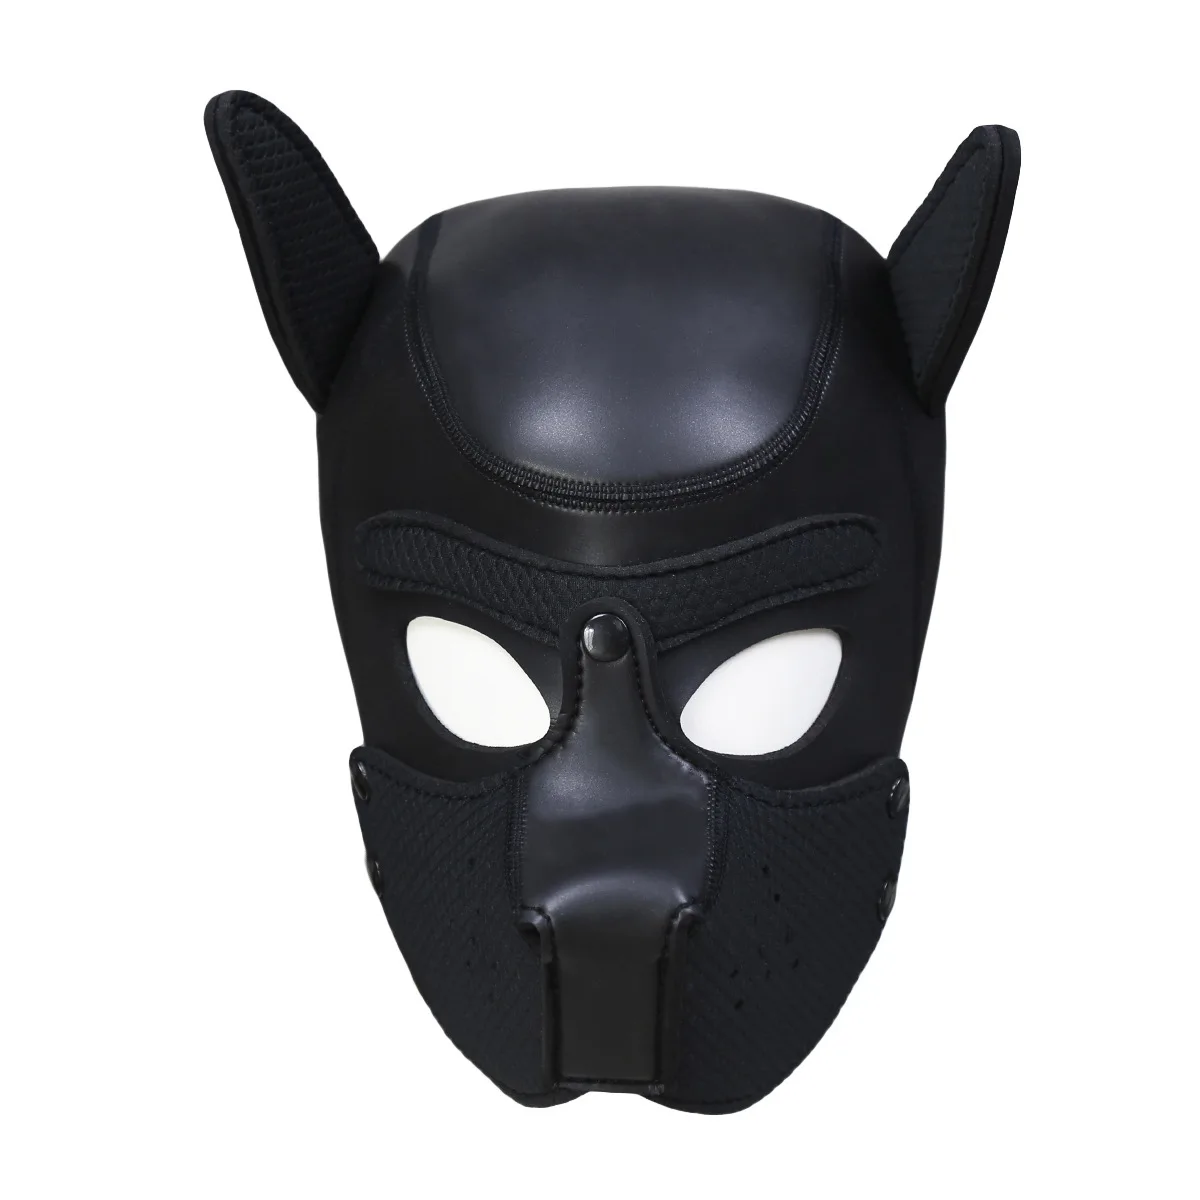 Brand New Fashion Padded Latex Rubber Role Play Dog Mask Puppy Cosplay Full Head with Ears 10 color Stage performance props Hot halloween outfits